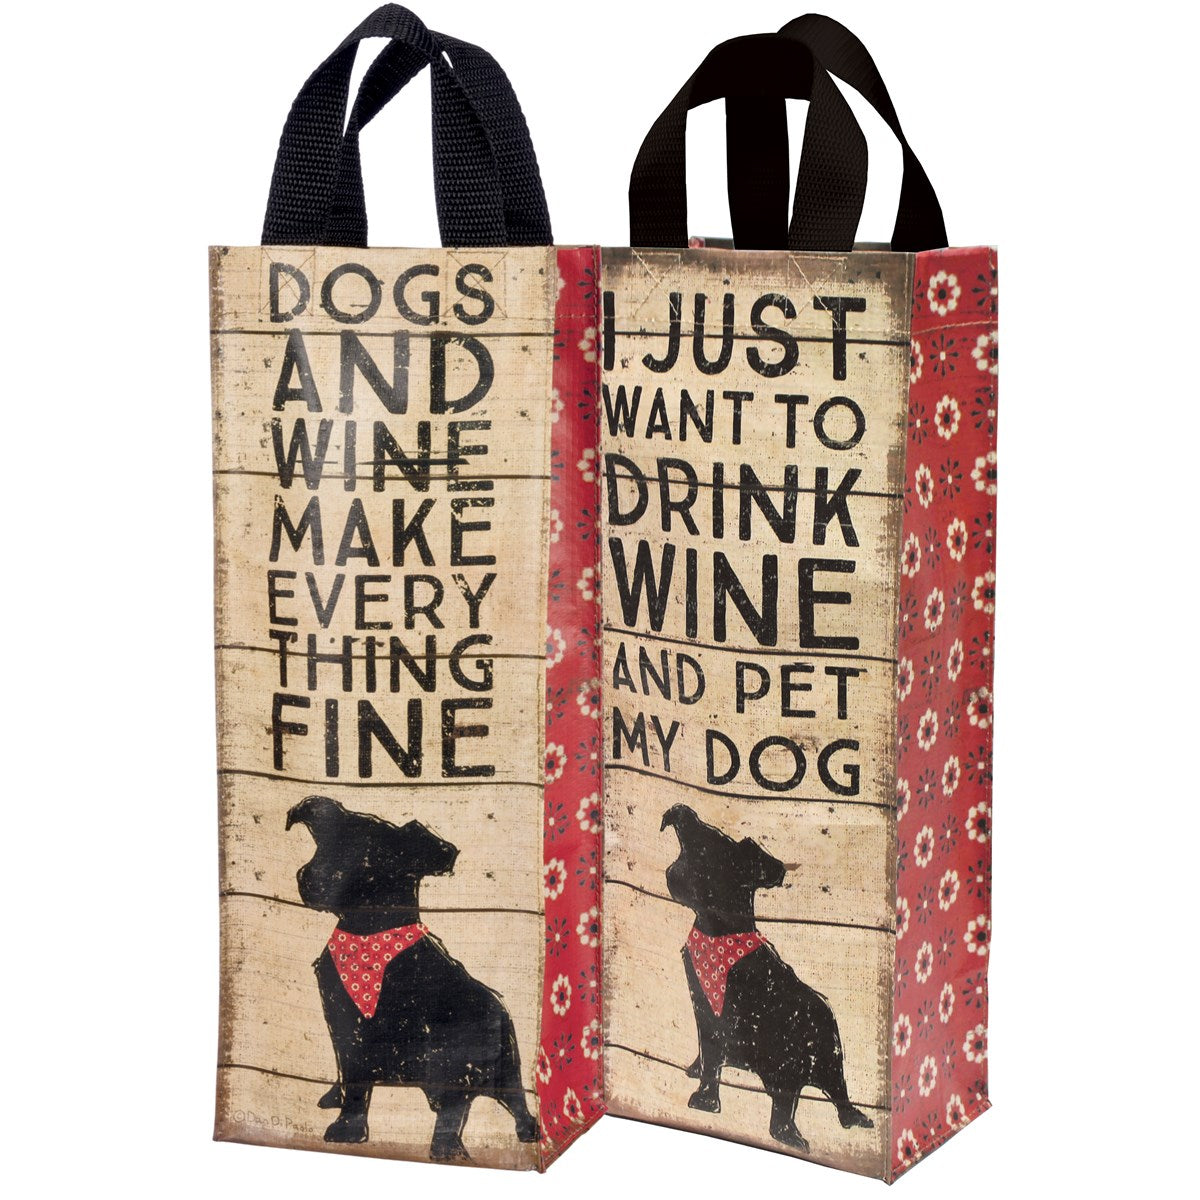 Dogs and Wine Wine Tote